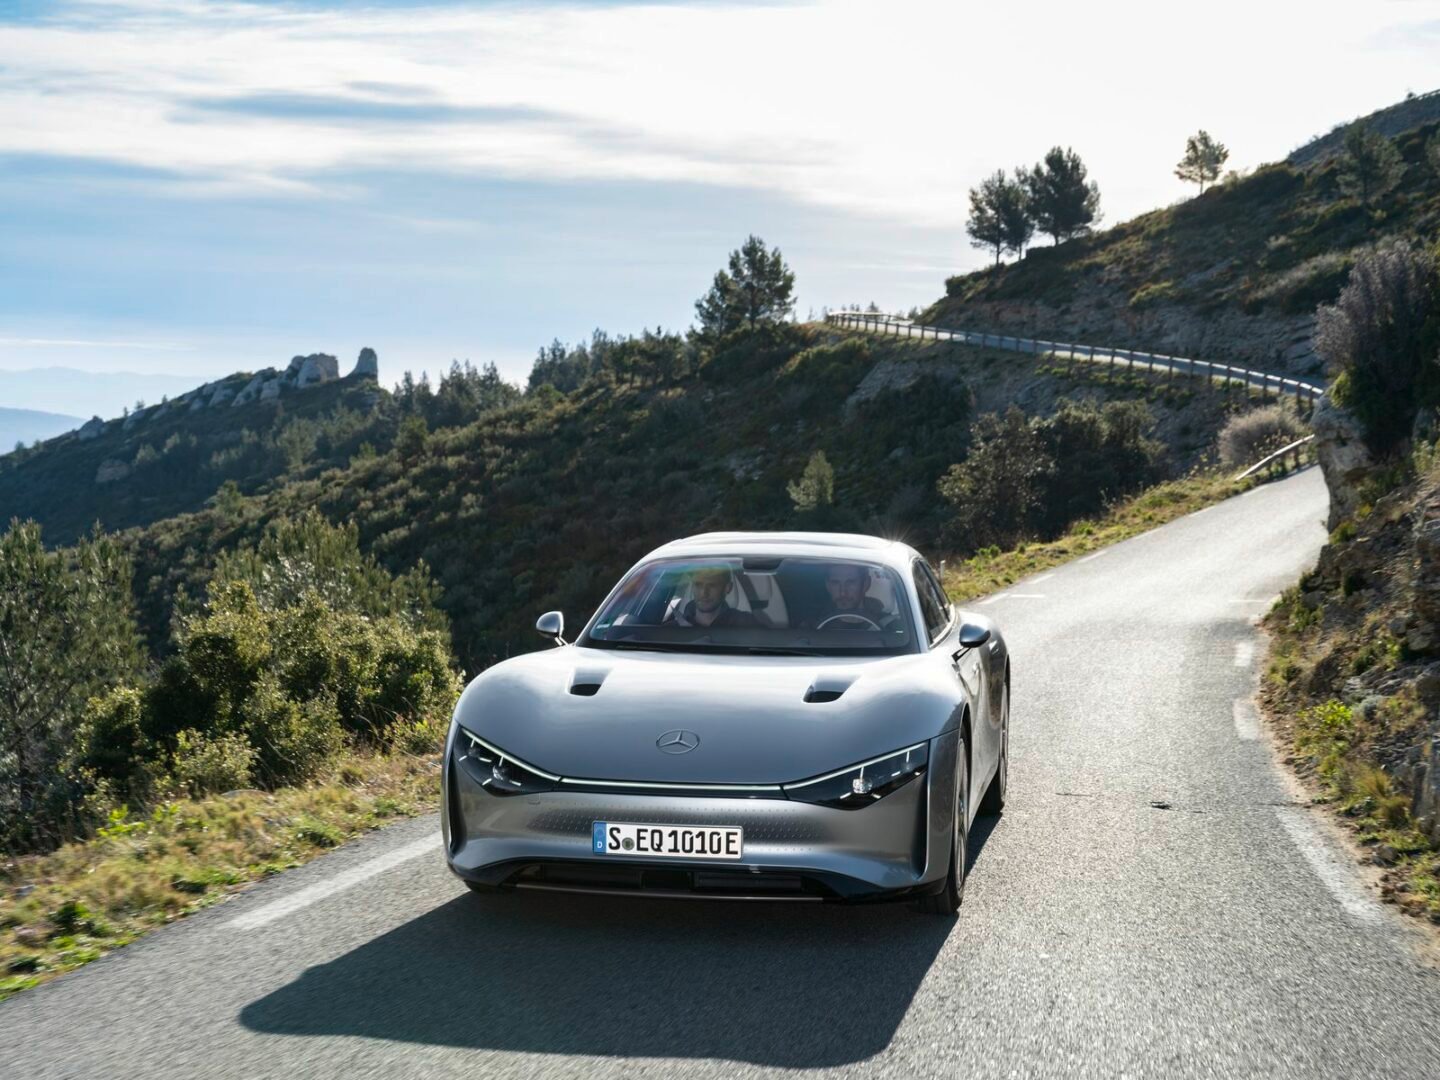 Mercedes-Benz Vision EQXX concept car travels to four European countries and completes 1,000 km on a single charge